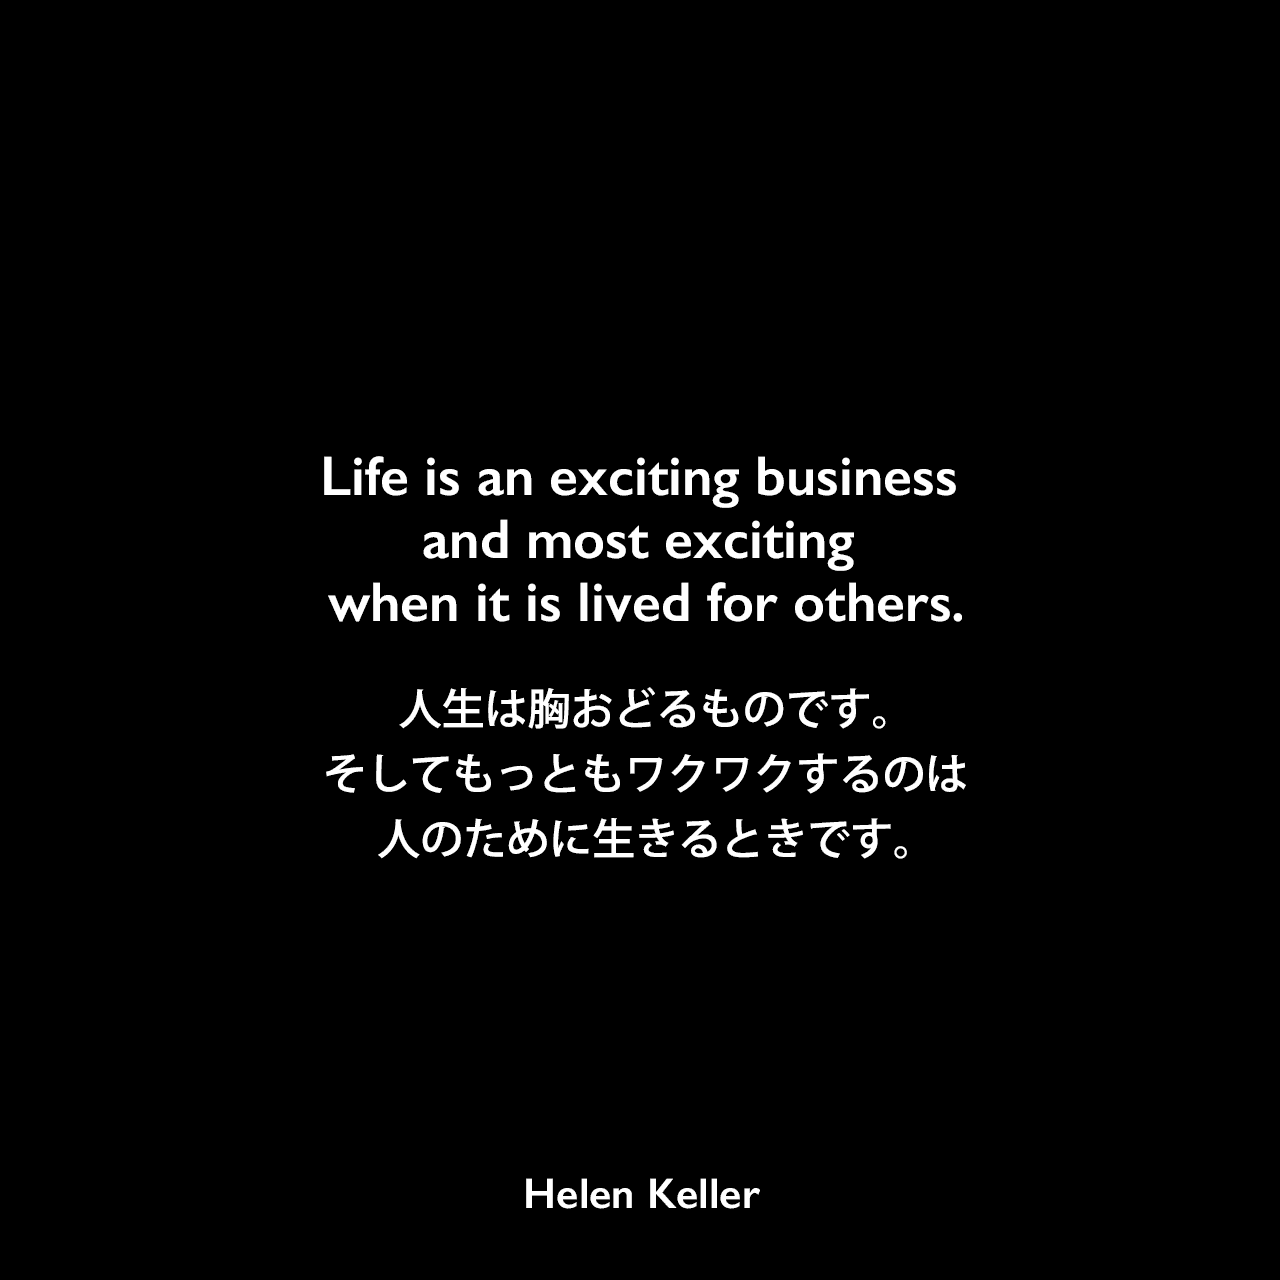 Life is an exciting business and most exciting when it is lived for others.人生は胸おどるものです。そしてもっともワクワクするのは、人のために生きるときです。Helen Keller